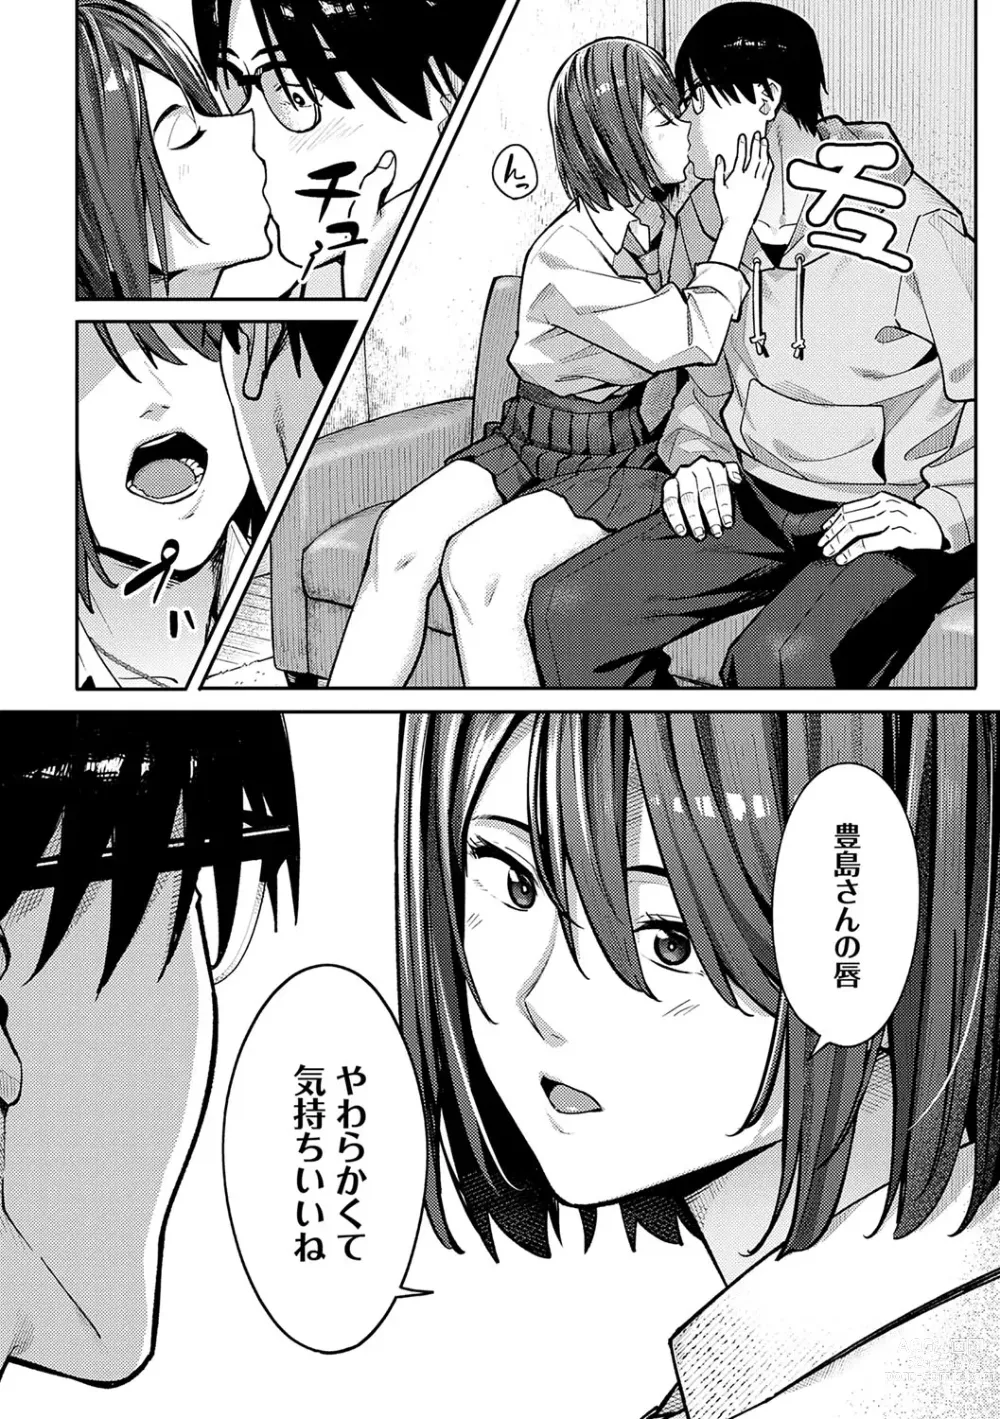 Page 11 of manga Toriaezu, Yattemiyo. - Lets have sex for now.